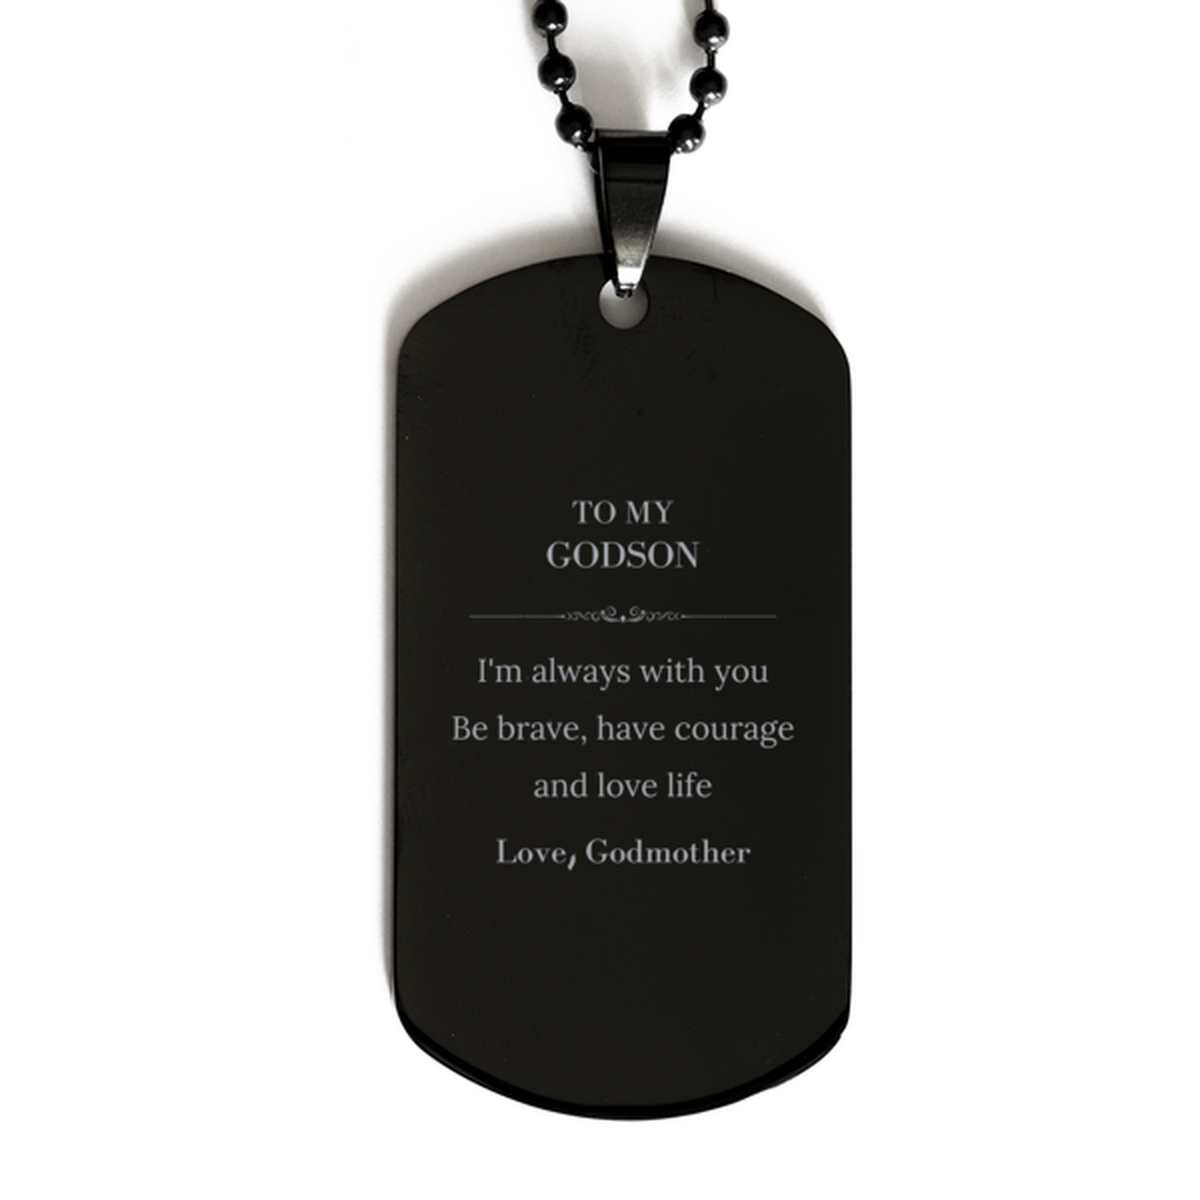 To My Godson Gifts from Godmother, Unique Black Dog Tag Inspirational Christmas Birthday Graduation Gifts for Godson I'm always with you. Be brave, have courage and love life. Love, Godmother